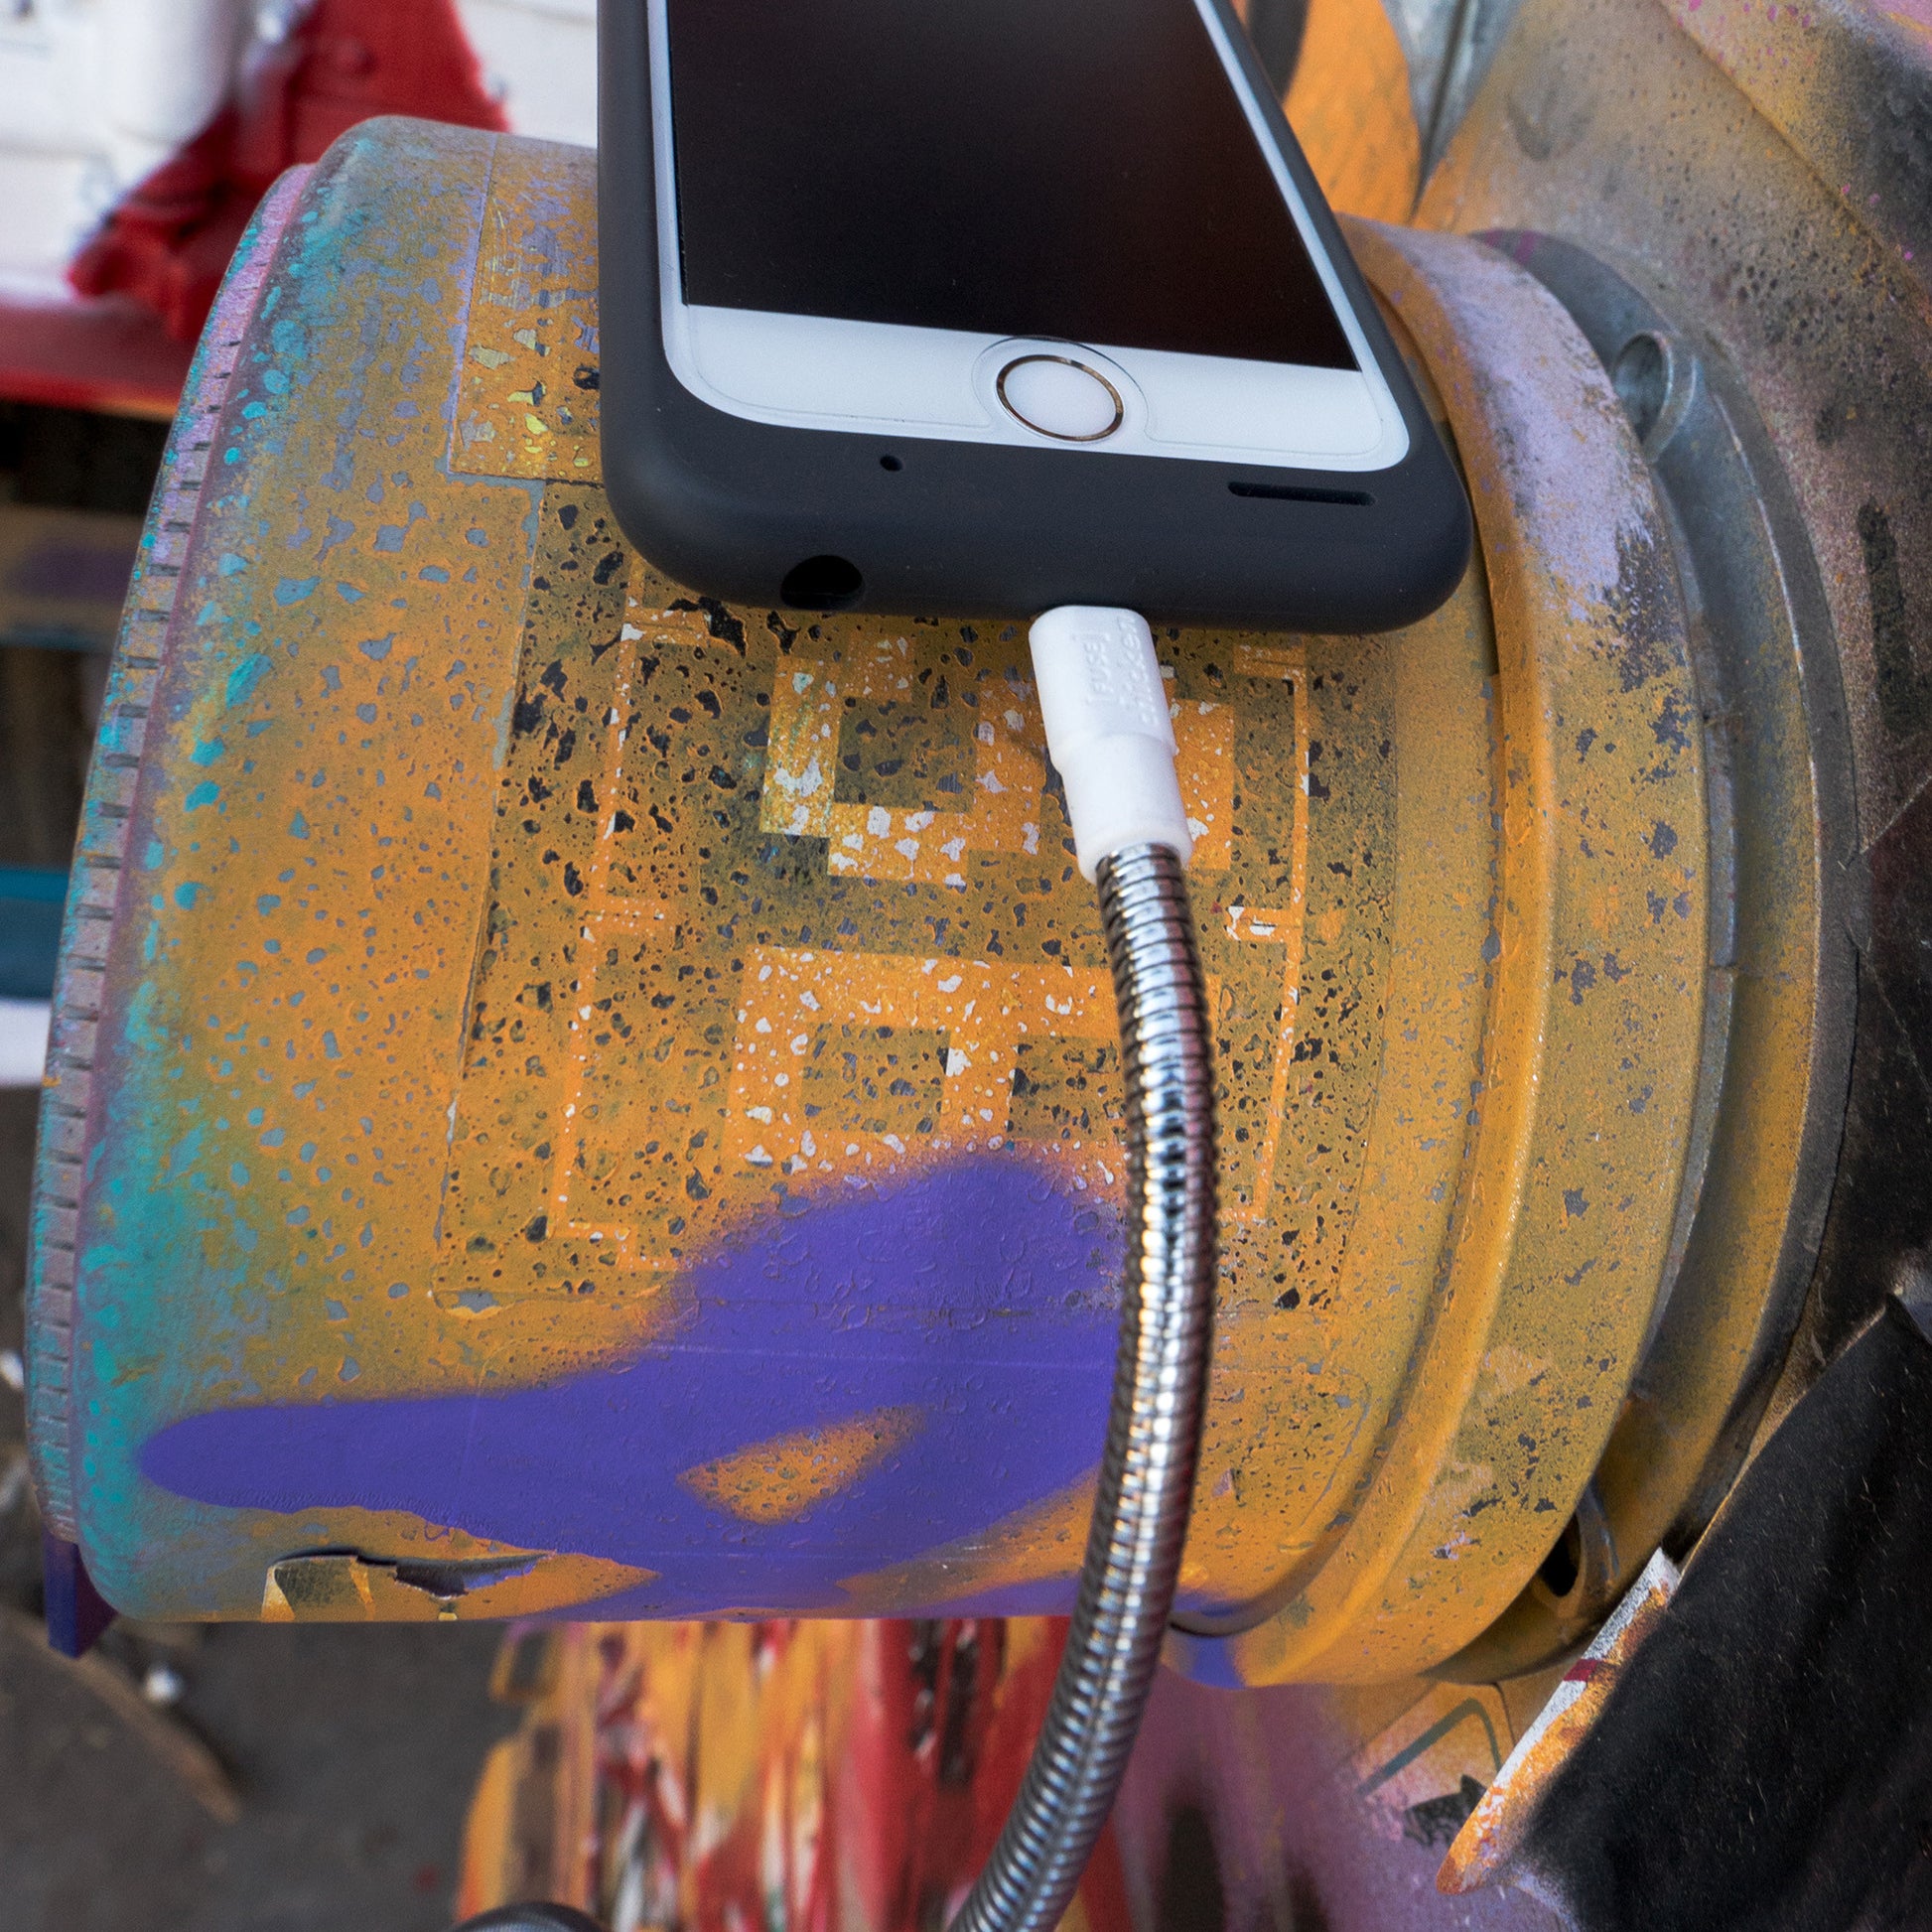 No More Frayed iPhone Cables! TITAN is The Toughest Cable on Earth